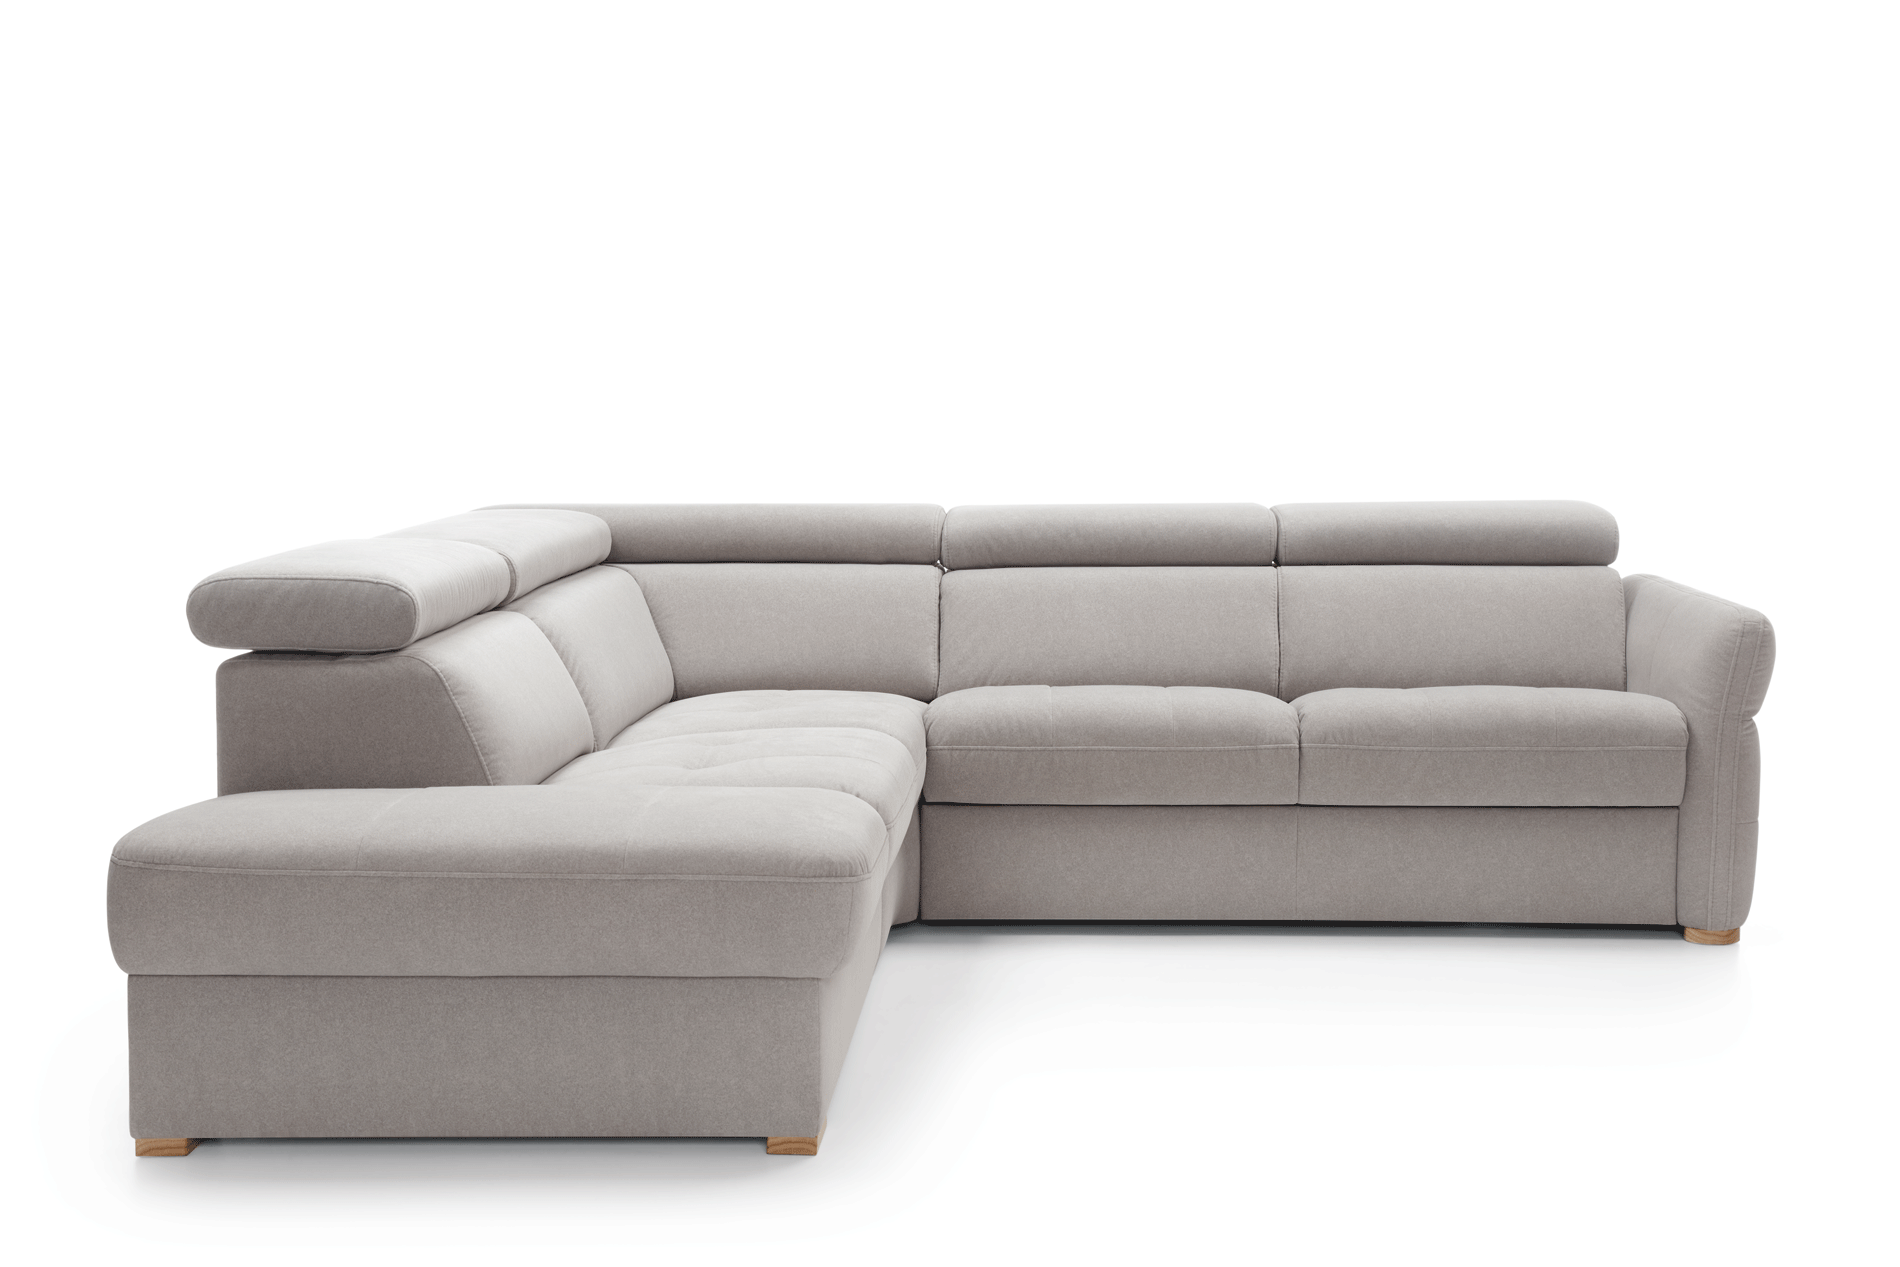 Living Room Furniture Sleepers Sofas Loveseats and Chairs Massimo Sectional w/ storage